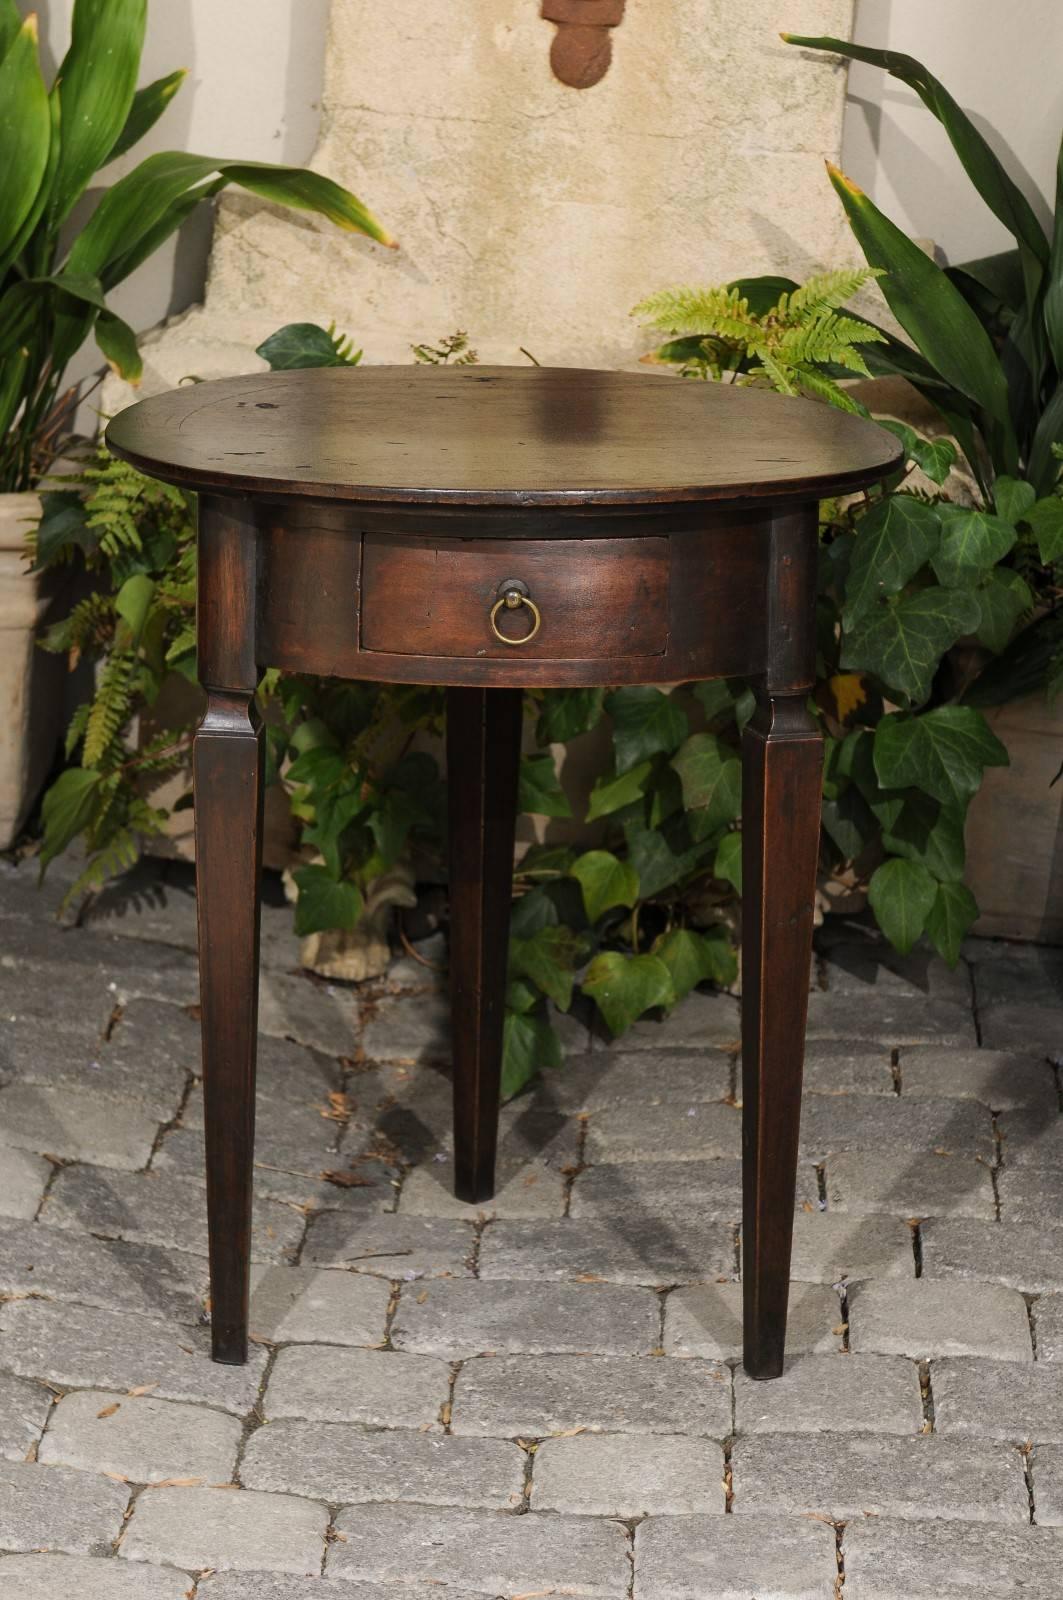 An Italian oak and walnut guéridon side table with circular top, single drawer and tapered legs from the early 19th century. Born in the early years of the 19th century, this Italian guéridon table features a round top showing good aging, sitting